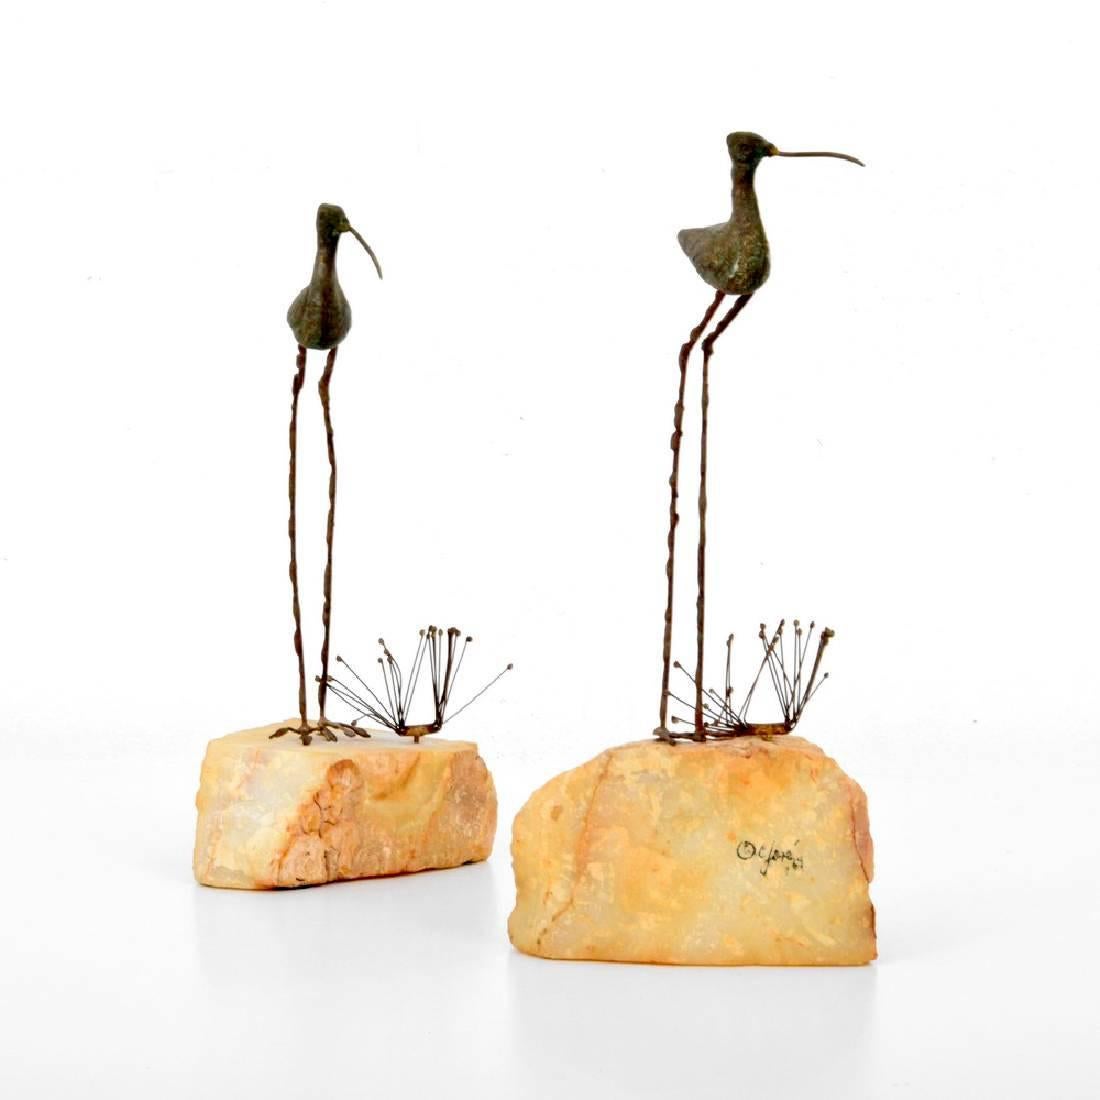 A pair of bronze sculpture on rocks by Curtis Jere for Artisan House dated 1969. Patinated bronze depicts egrets and grasses perched on natural rocks, in a very poetic Zen style. The tall one is 13.75 inch H by 5.25 W by 4 D; the short one is 12.25